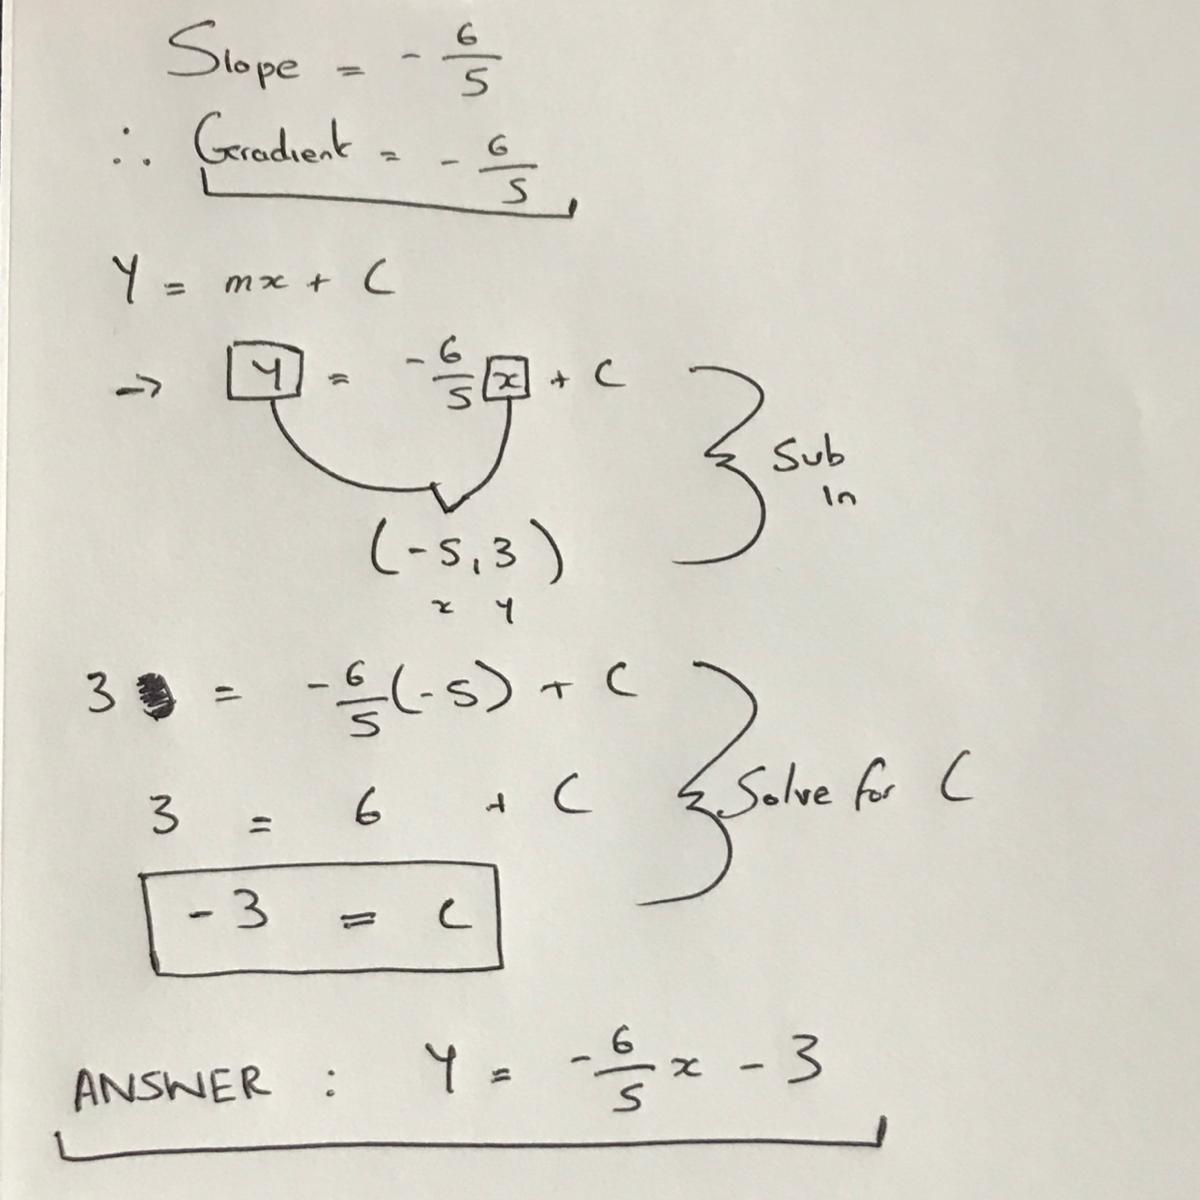 What Is The Equation Of The Line That Passes Through The Point (-5, 3) And Has Aslope Of -6/5